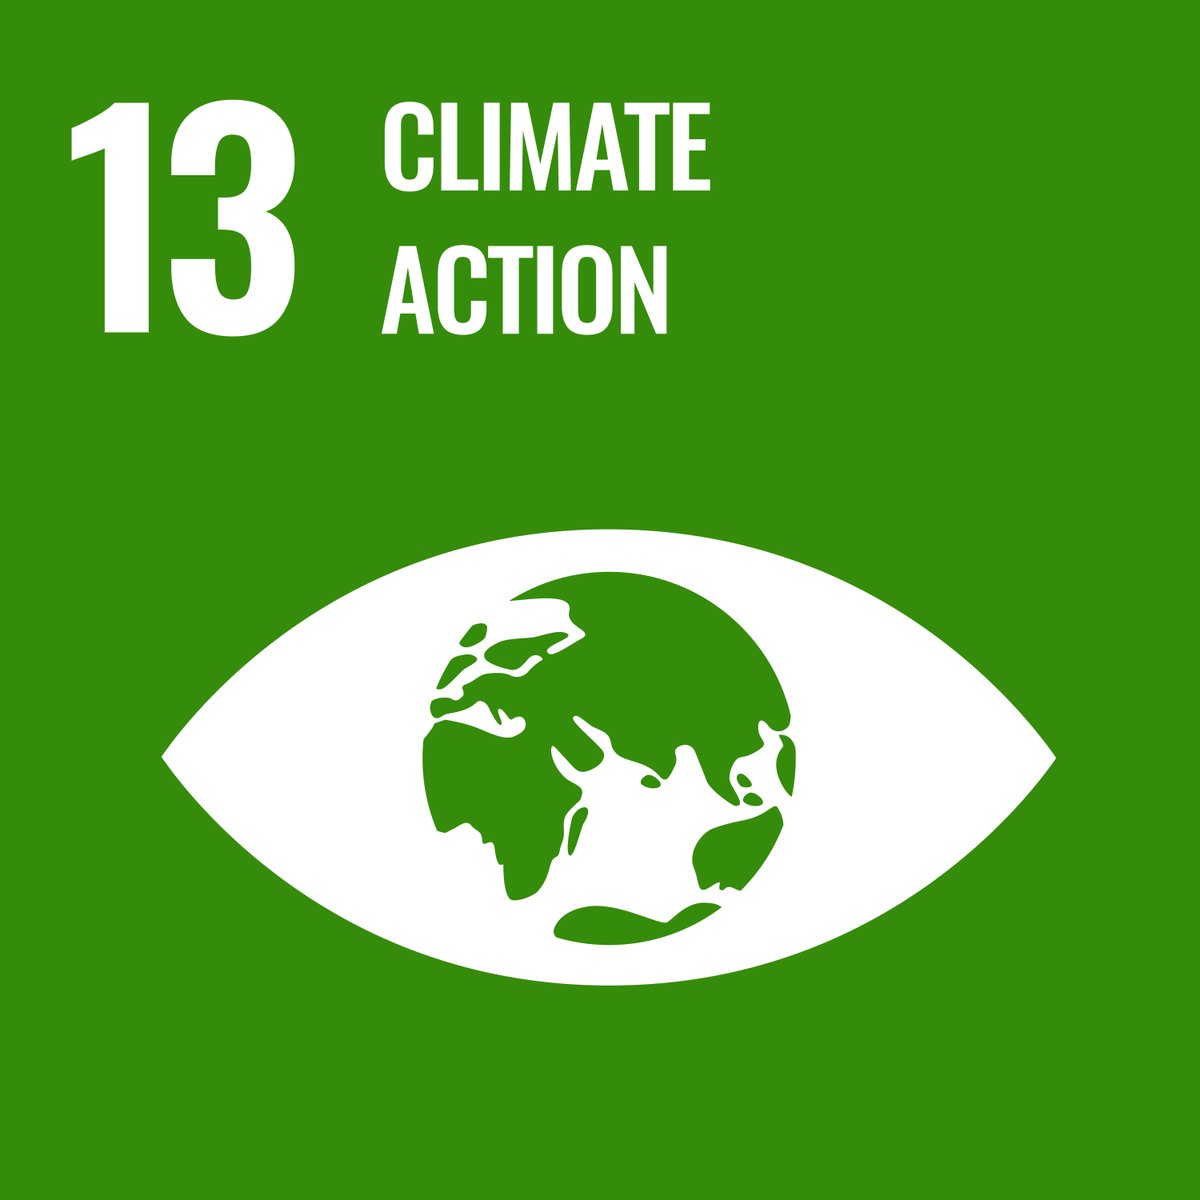 This week we are promoting ways to support SDG 13➡️#ClimateAction 👇 🛍️Take re-usable bags to the shop & only buy what you need 🚗Maintain your car, it will let out less toxic fumes 🏡Think about making your home more energy efficient #SDGsIrl @GreenerClare